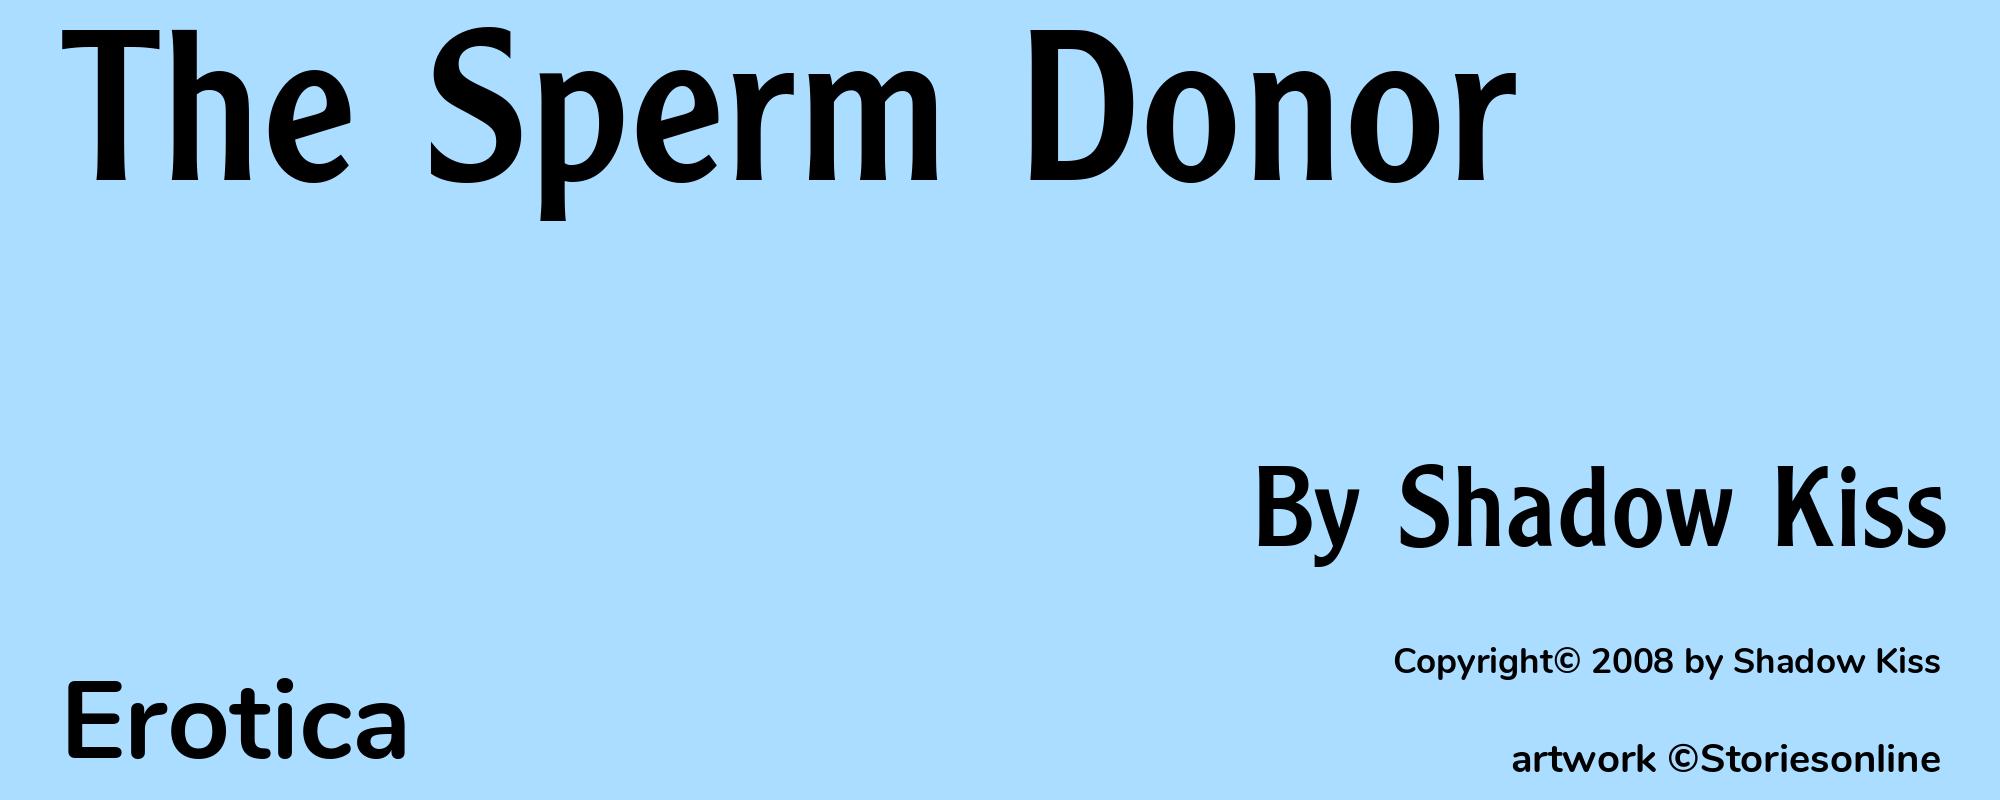 The Sperm Donor - Cover